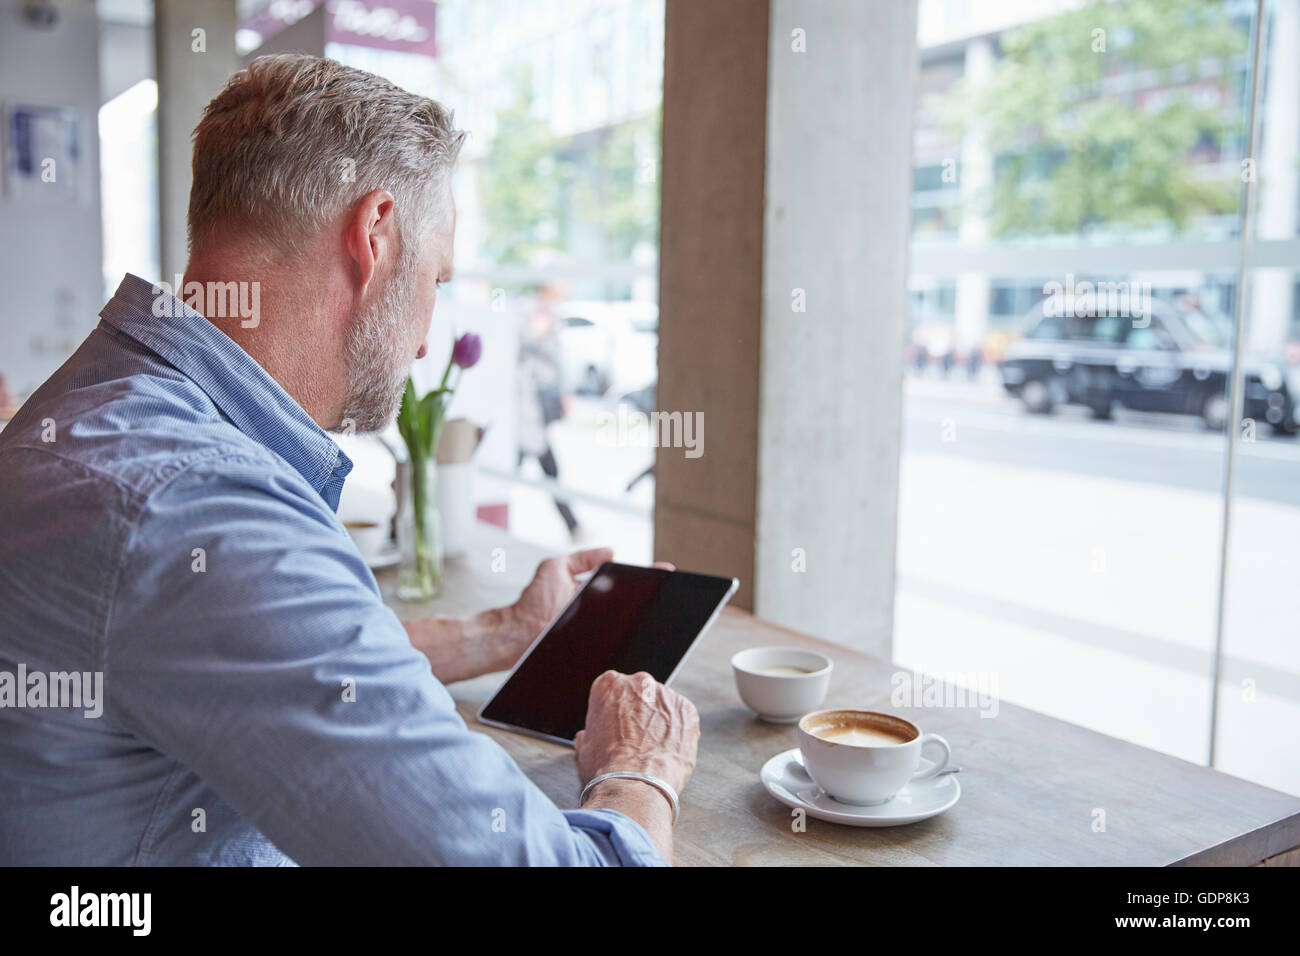 Mature man sitting in cafe, using digital tablet, rear view Stock Photo